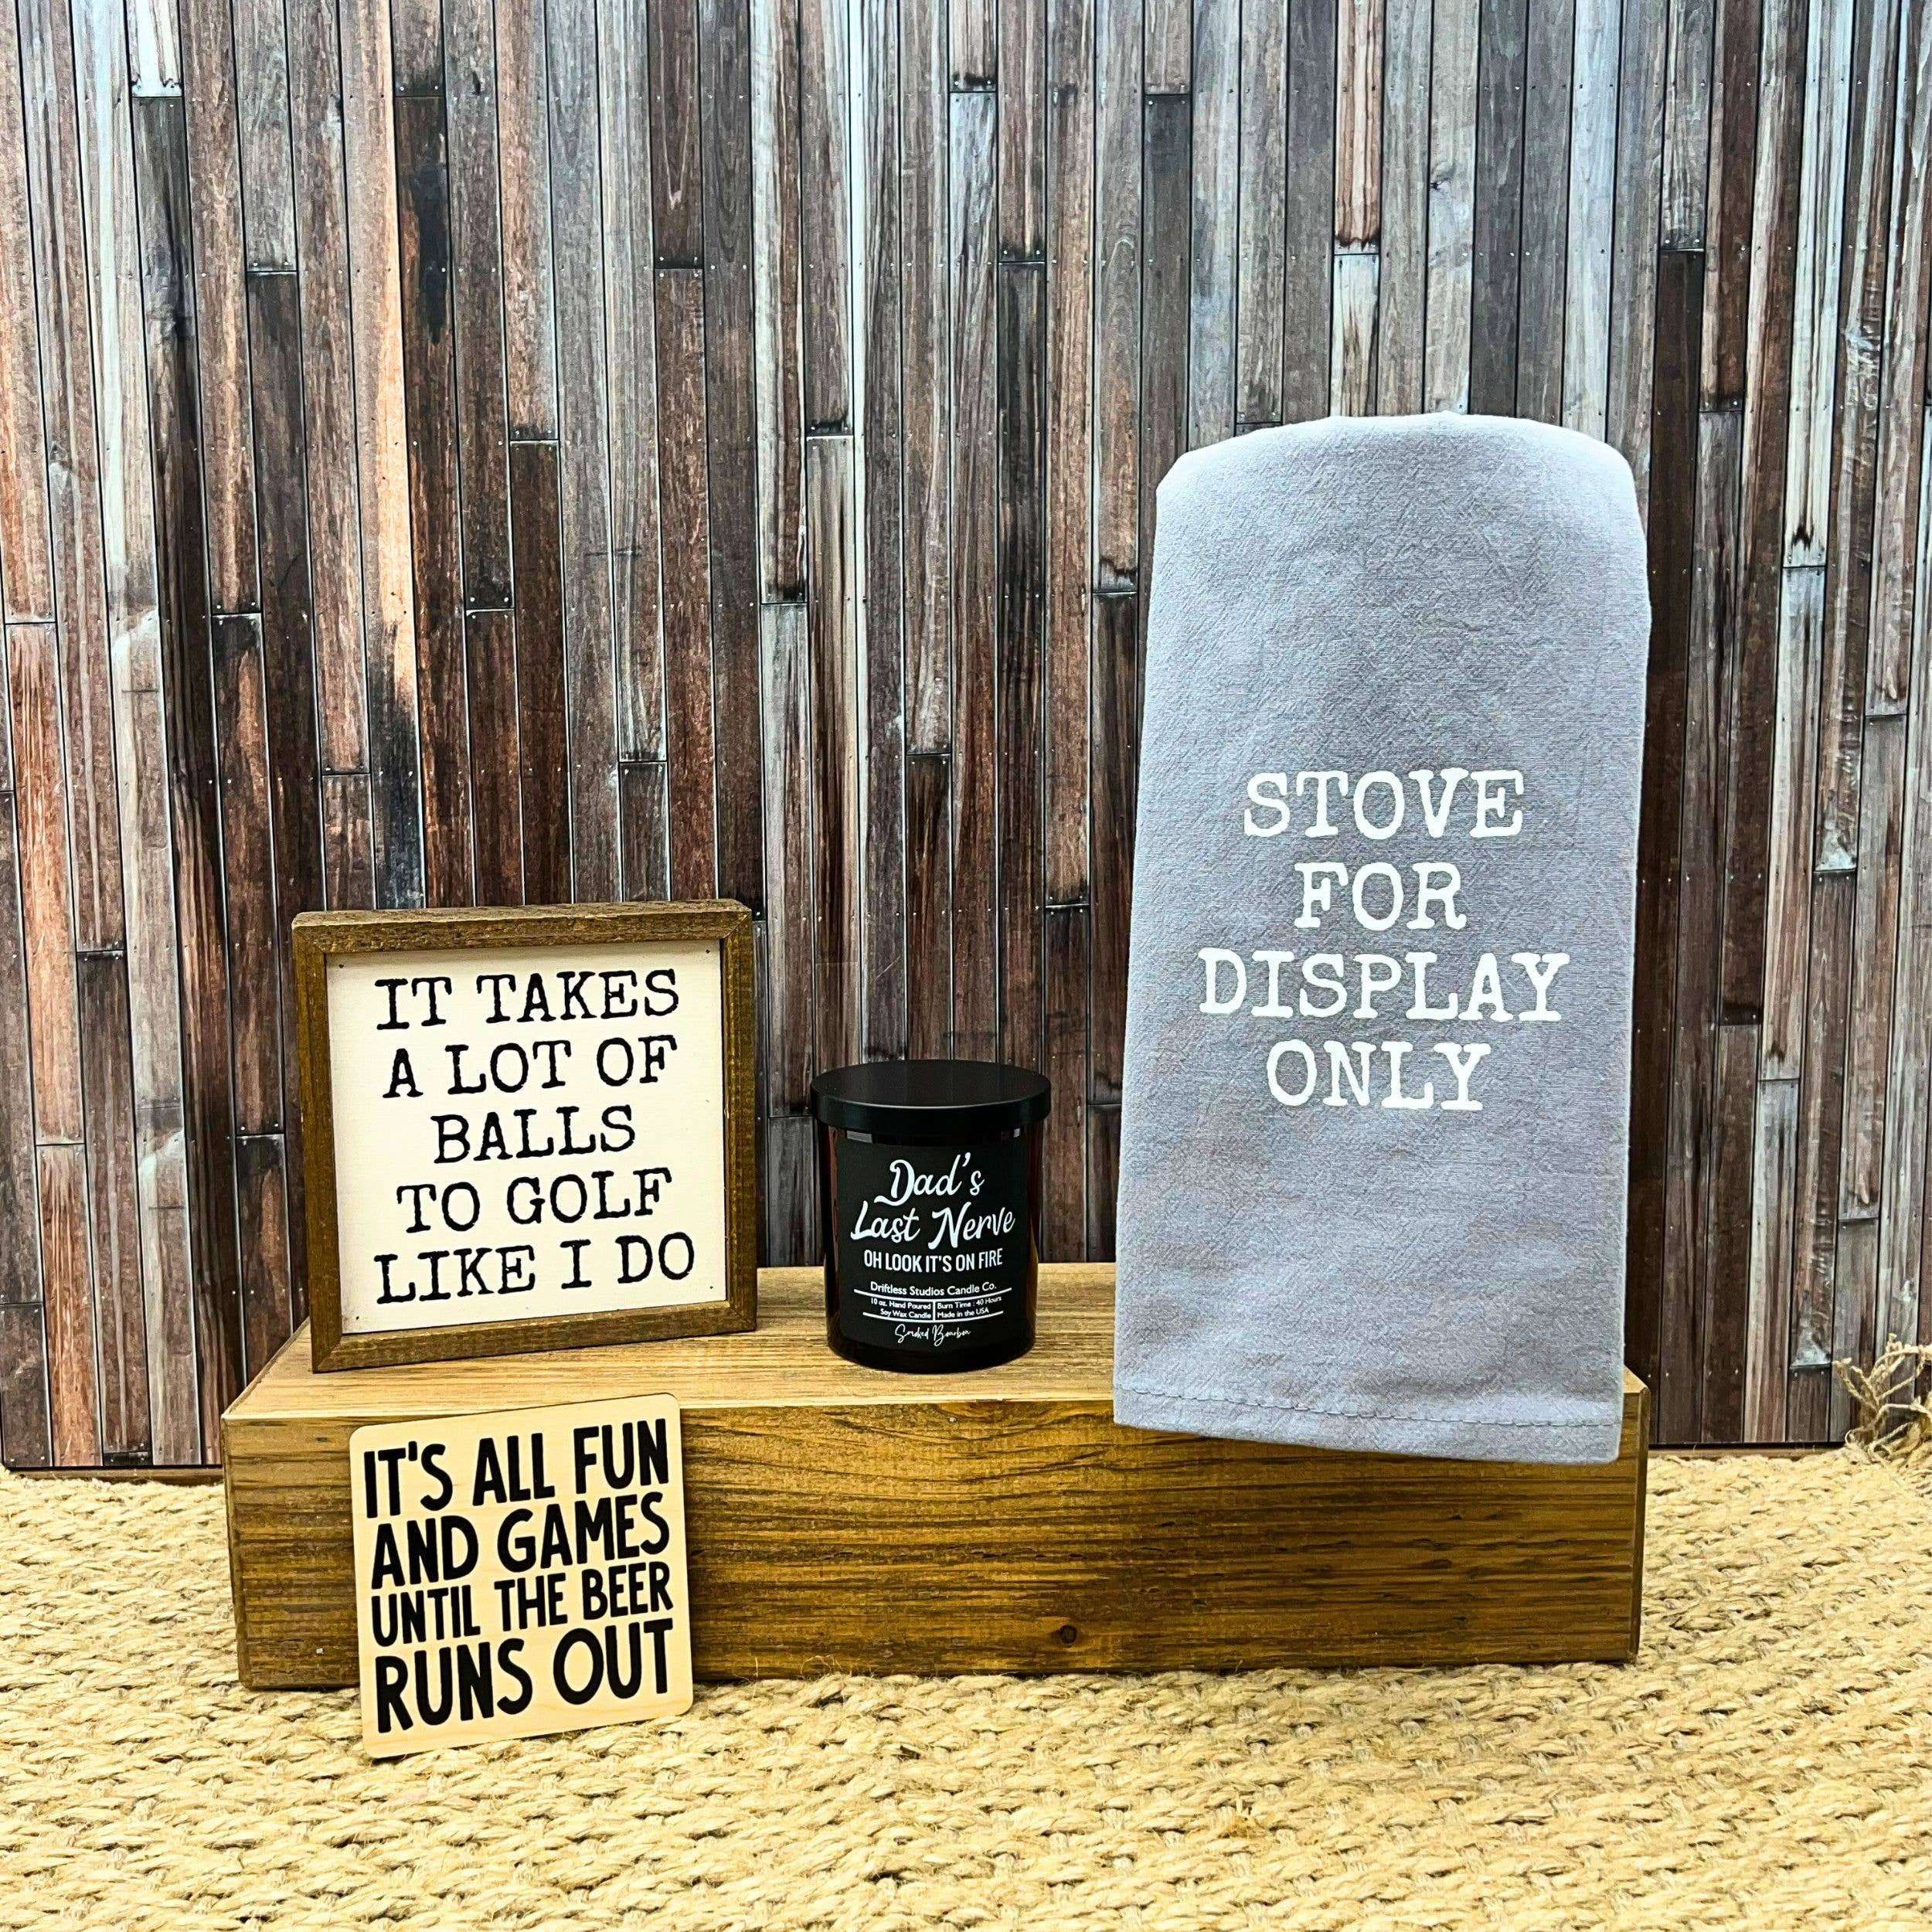 Dads Last Nerve - Fathers Day Gifts Candles - Soy Wax Candle: Smoked Bourbon